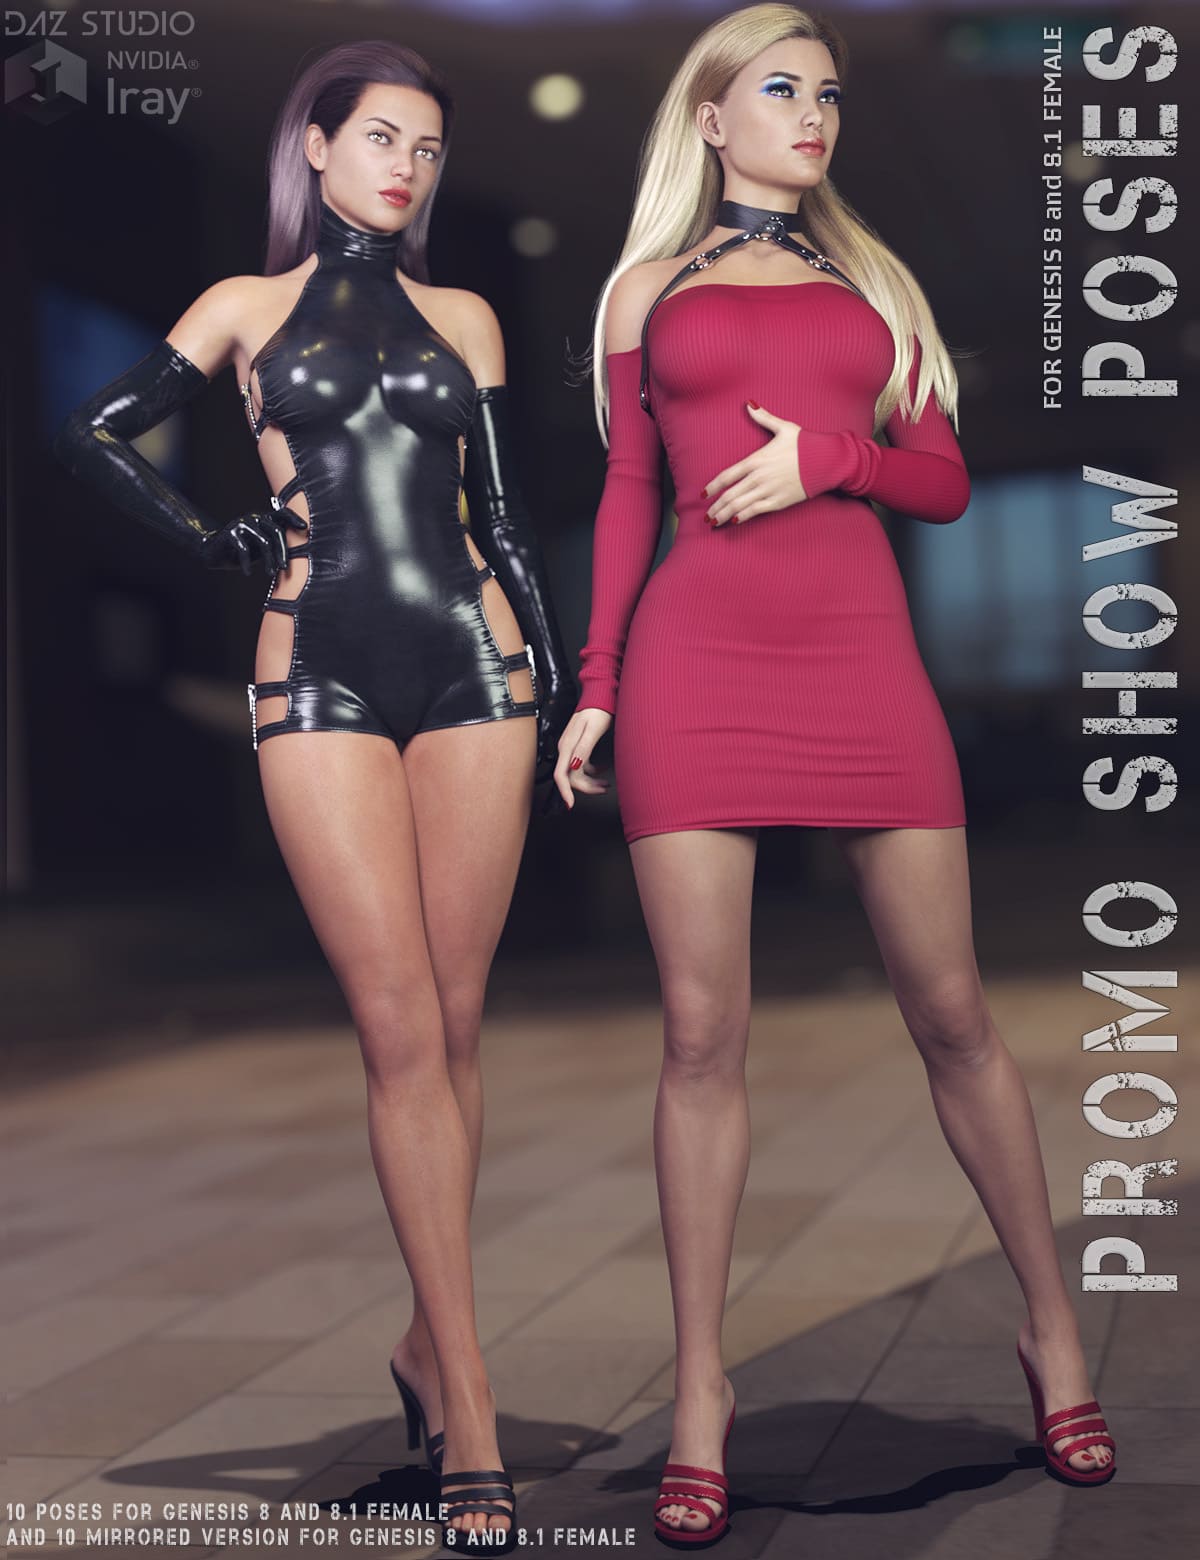 Lilflame Promo Show Poses for Genesis 8 and 8.1 Female_DAZ3D下载站